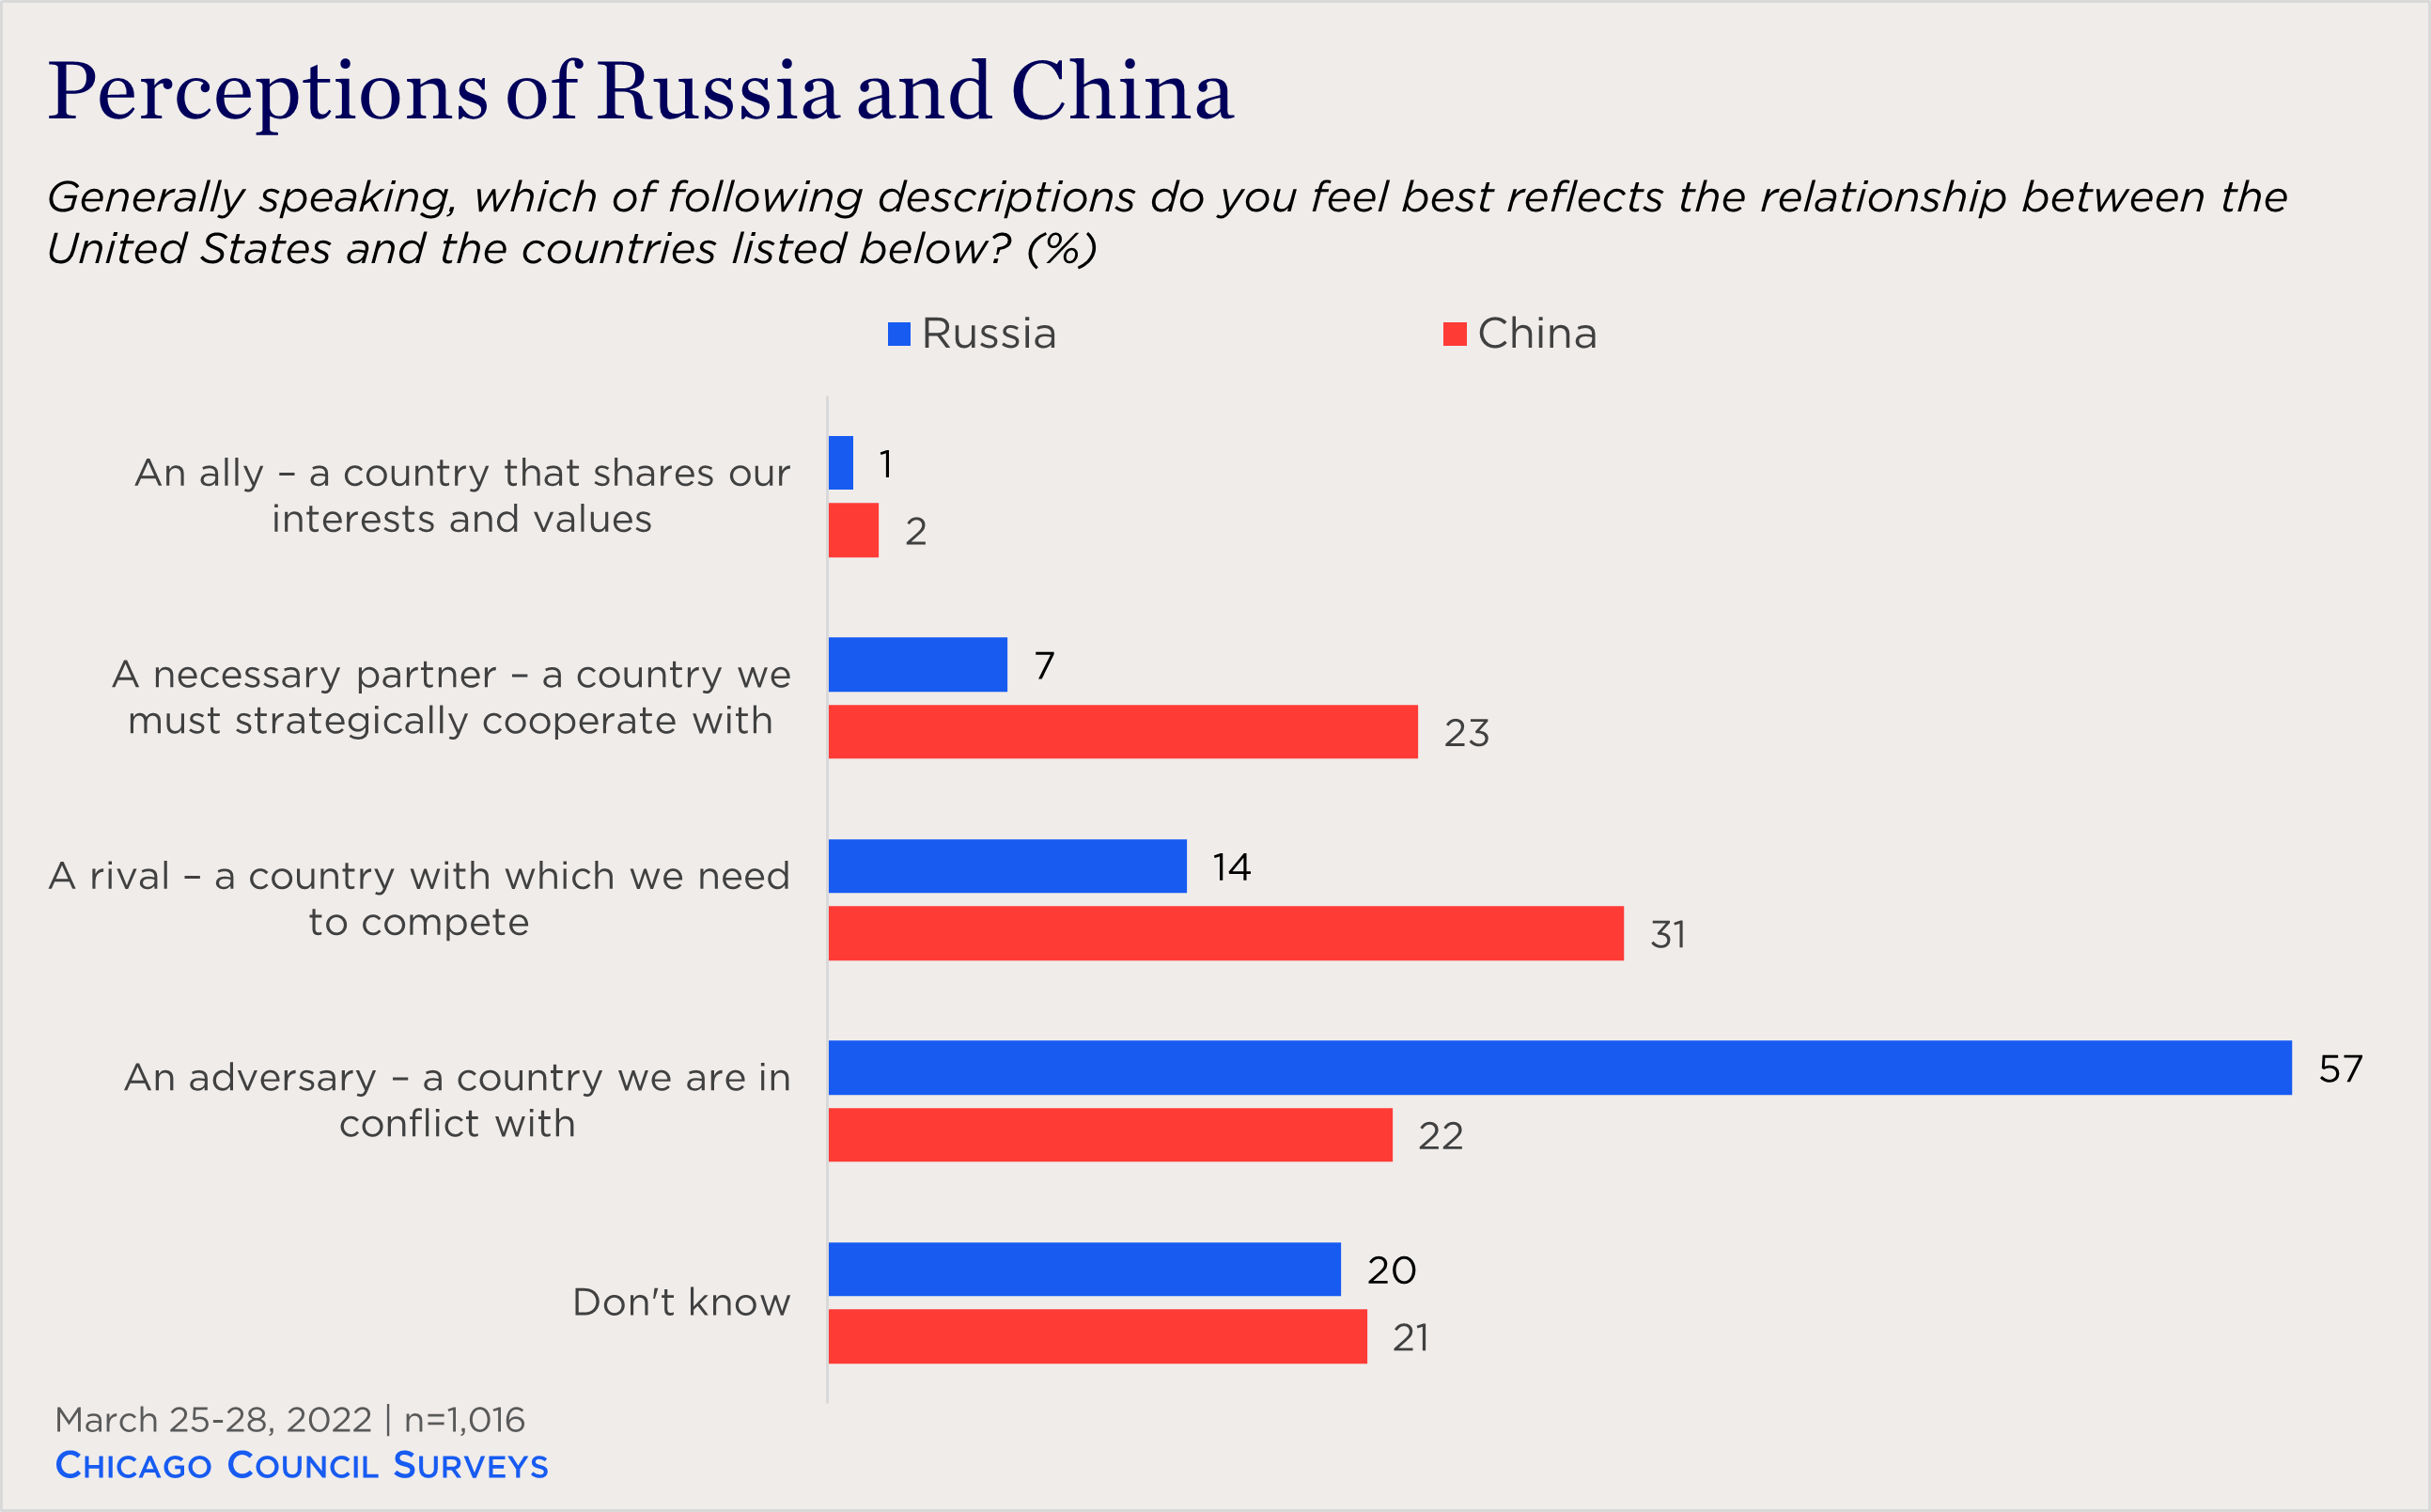 "bar chart showing perceptions of Russia and China"